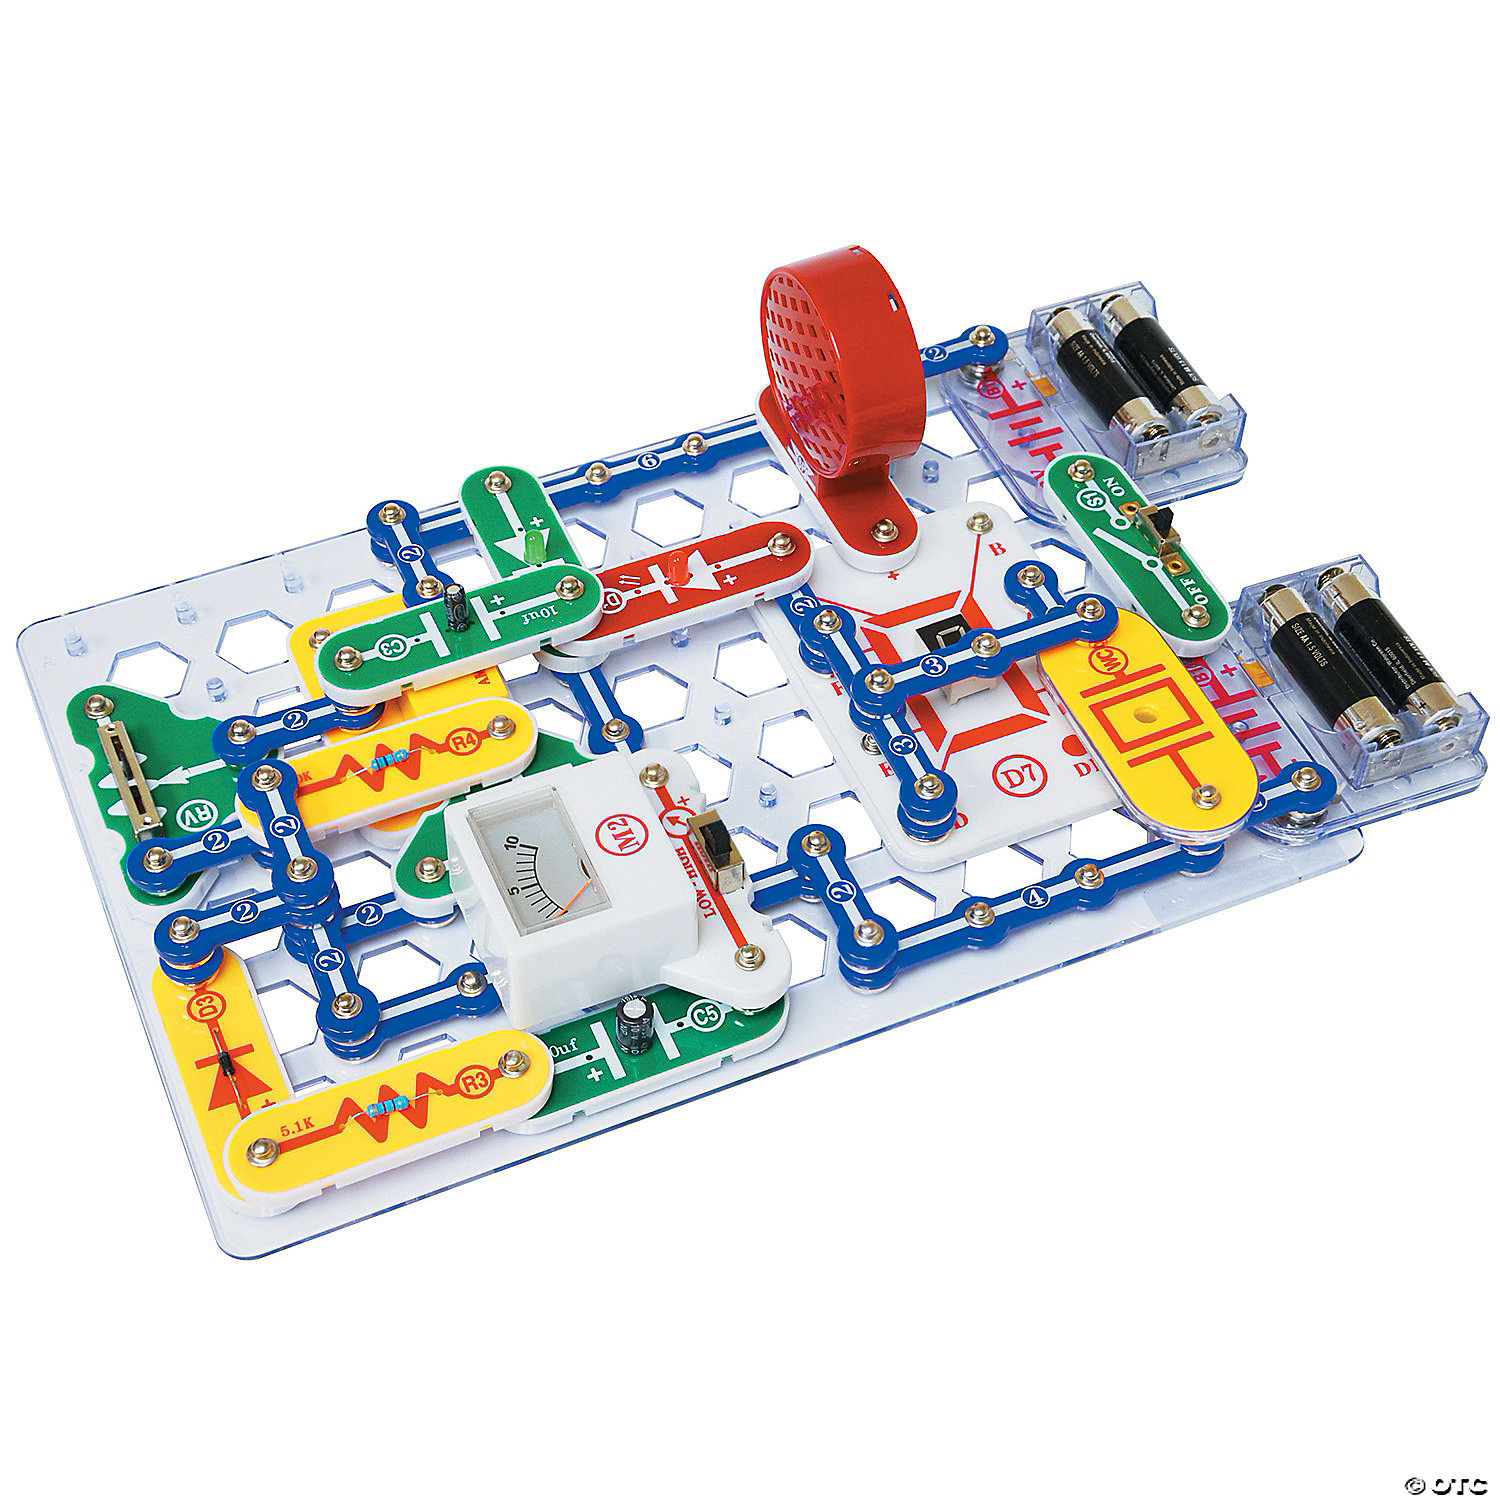 snap circuits for 5 year old